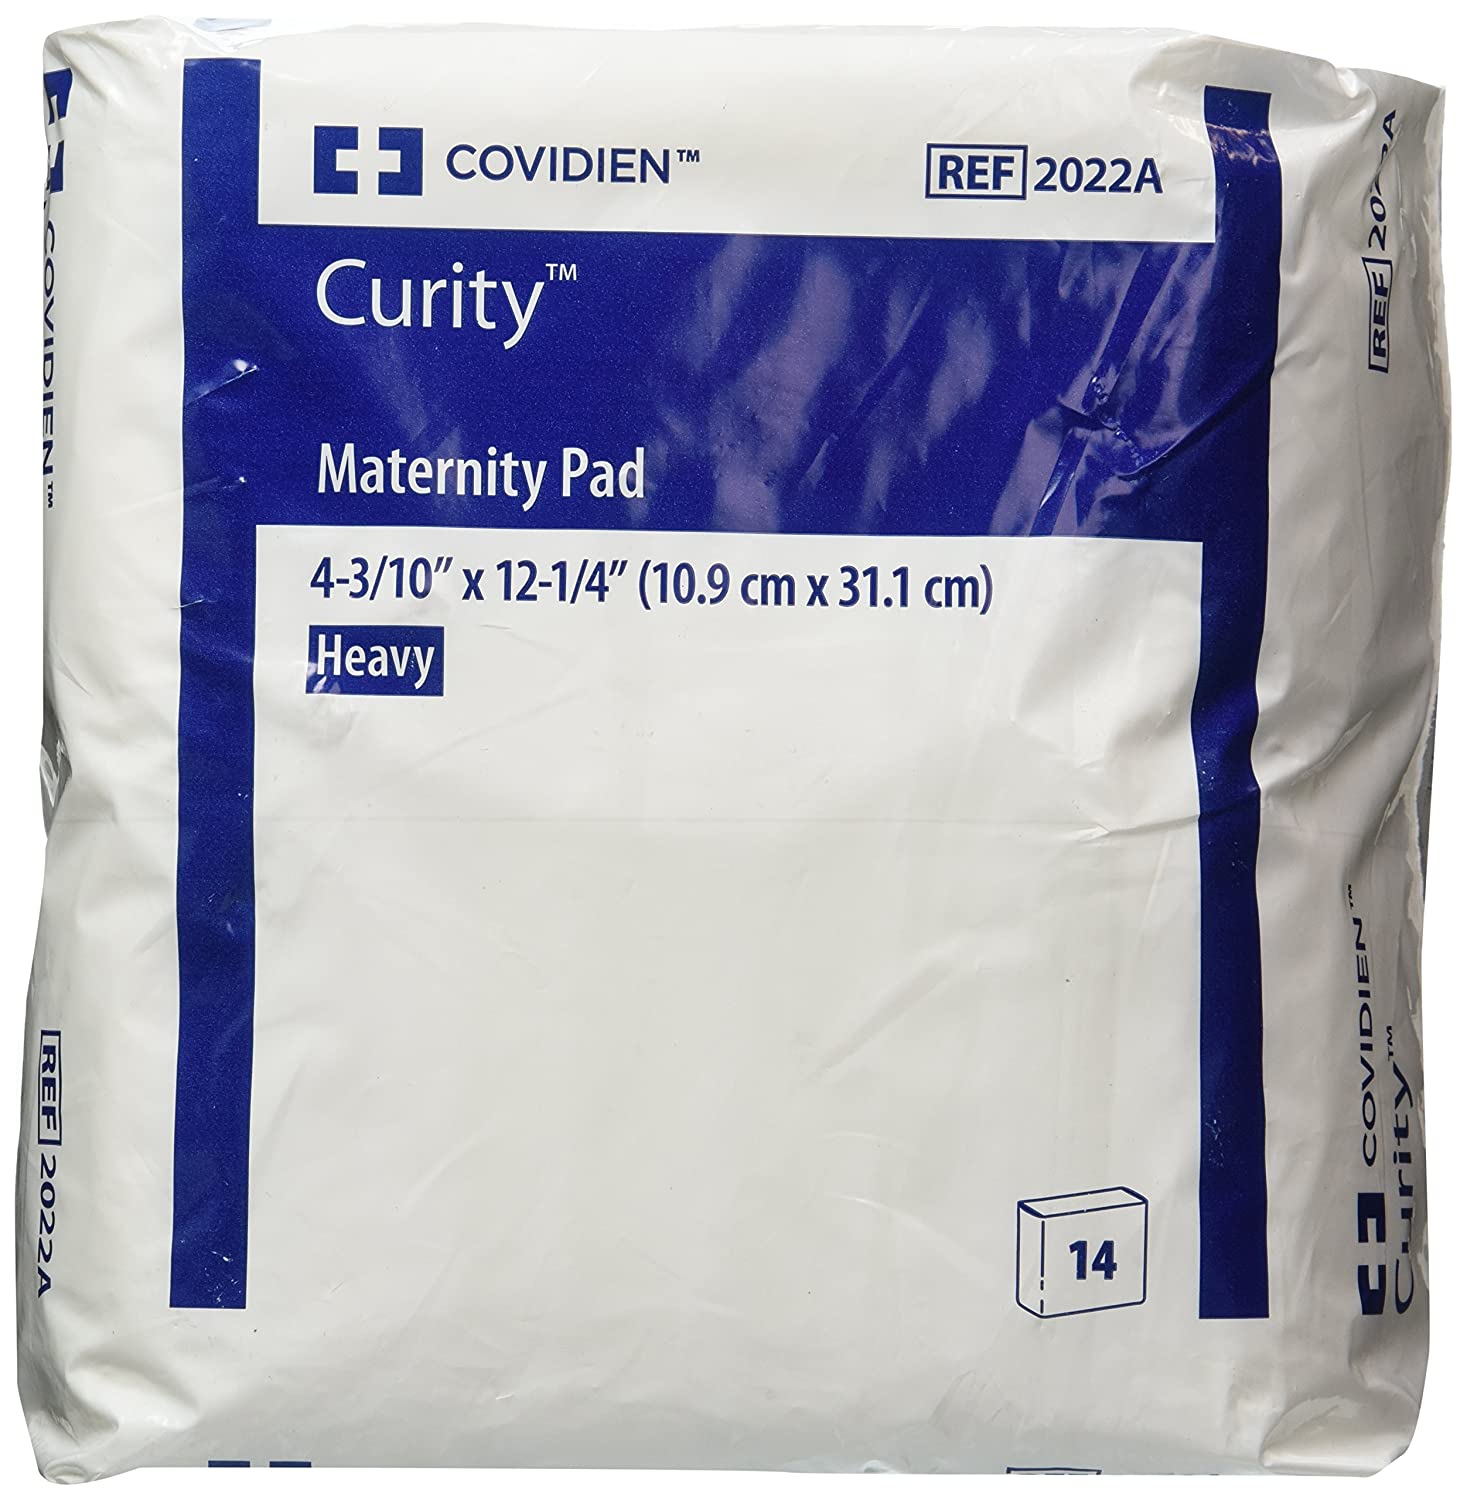 Covidien Curity Maternity Pad Heavy 4.33" x 12.25" (Bag of 14 Pads)